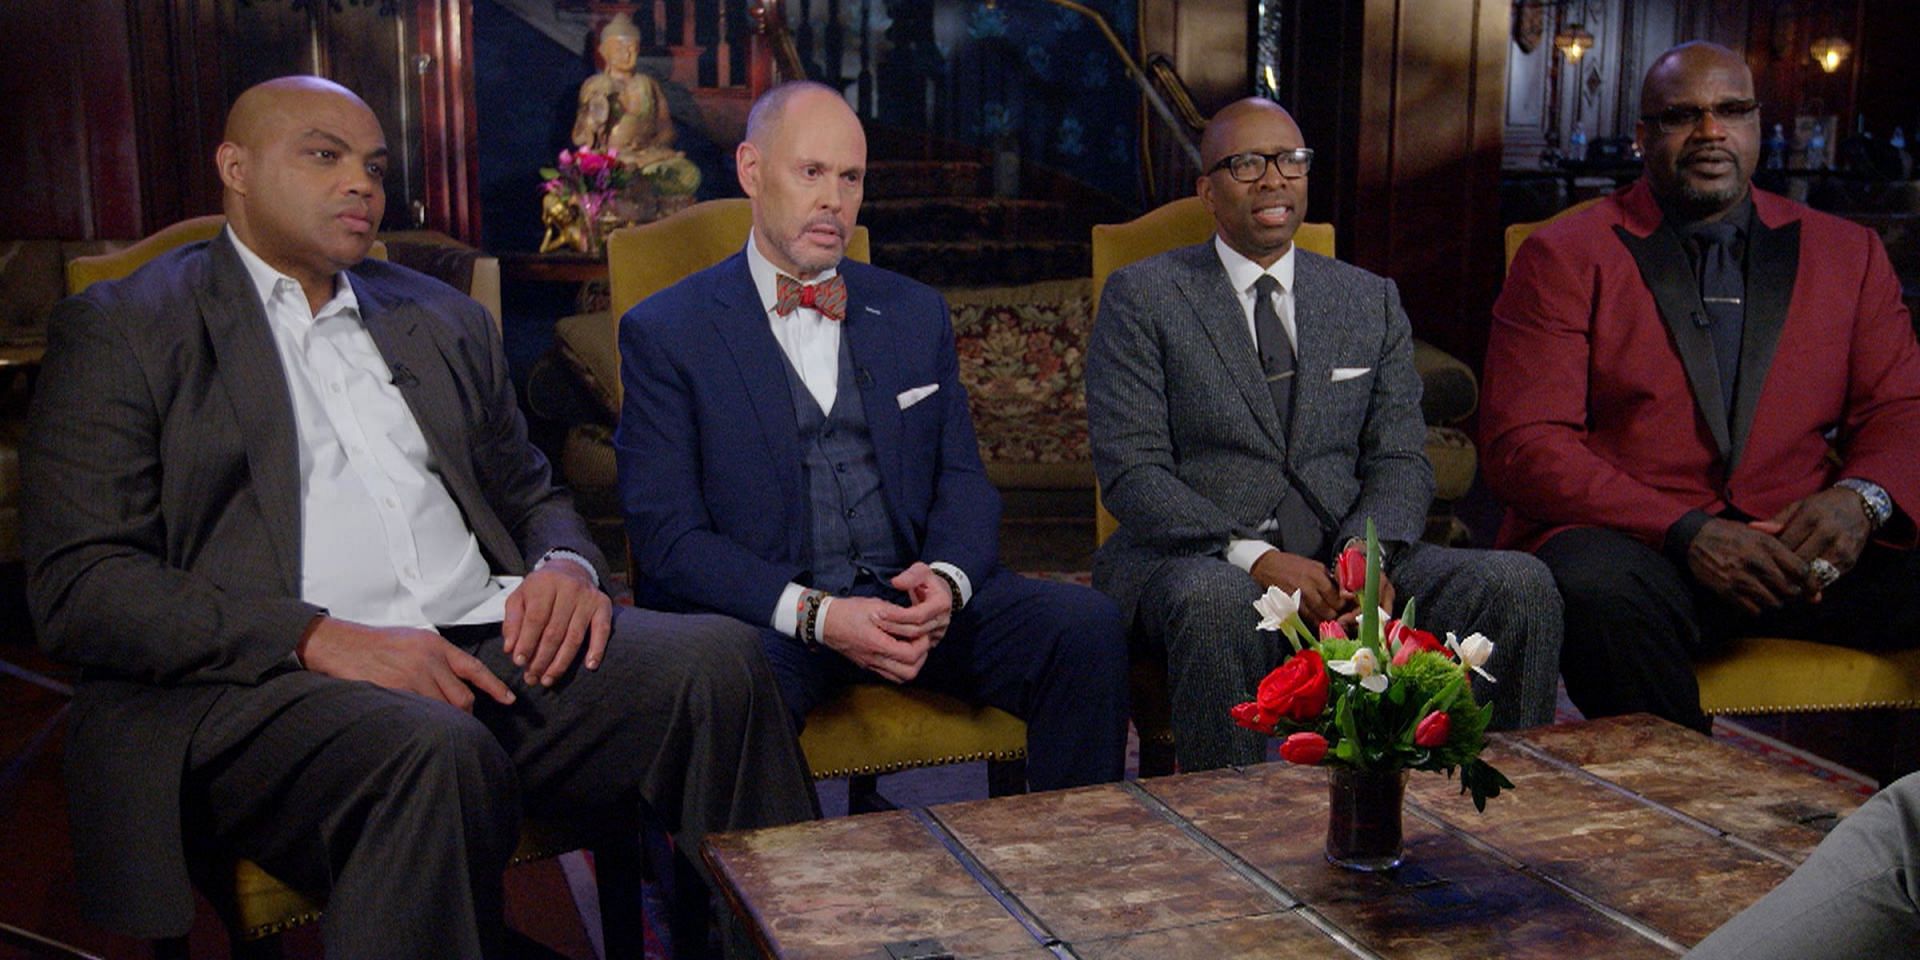 The Inside the NBA crew on the Today Show [Source: Today Show]